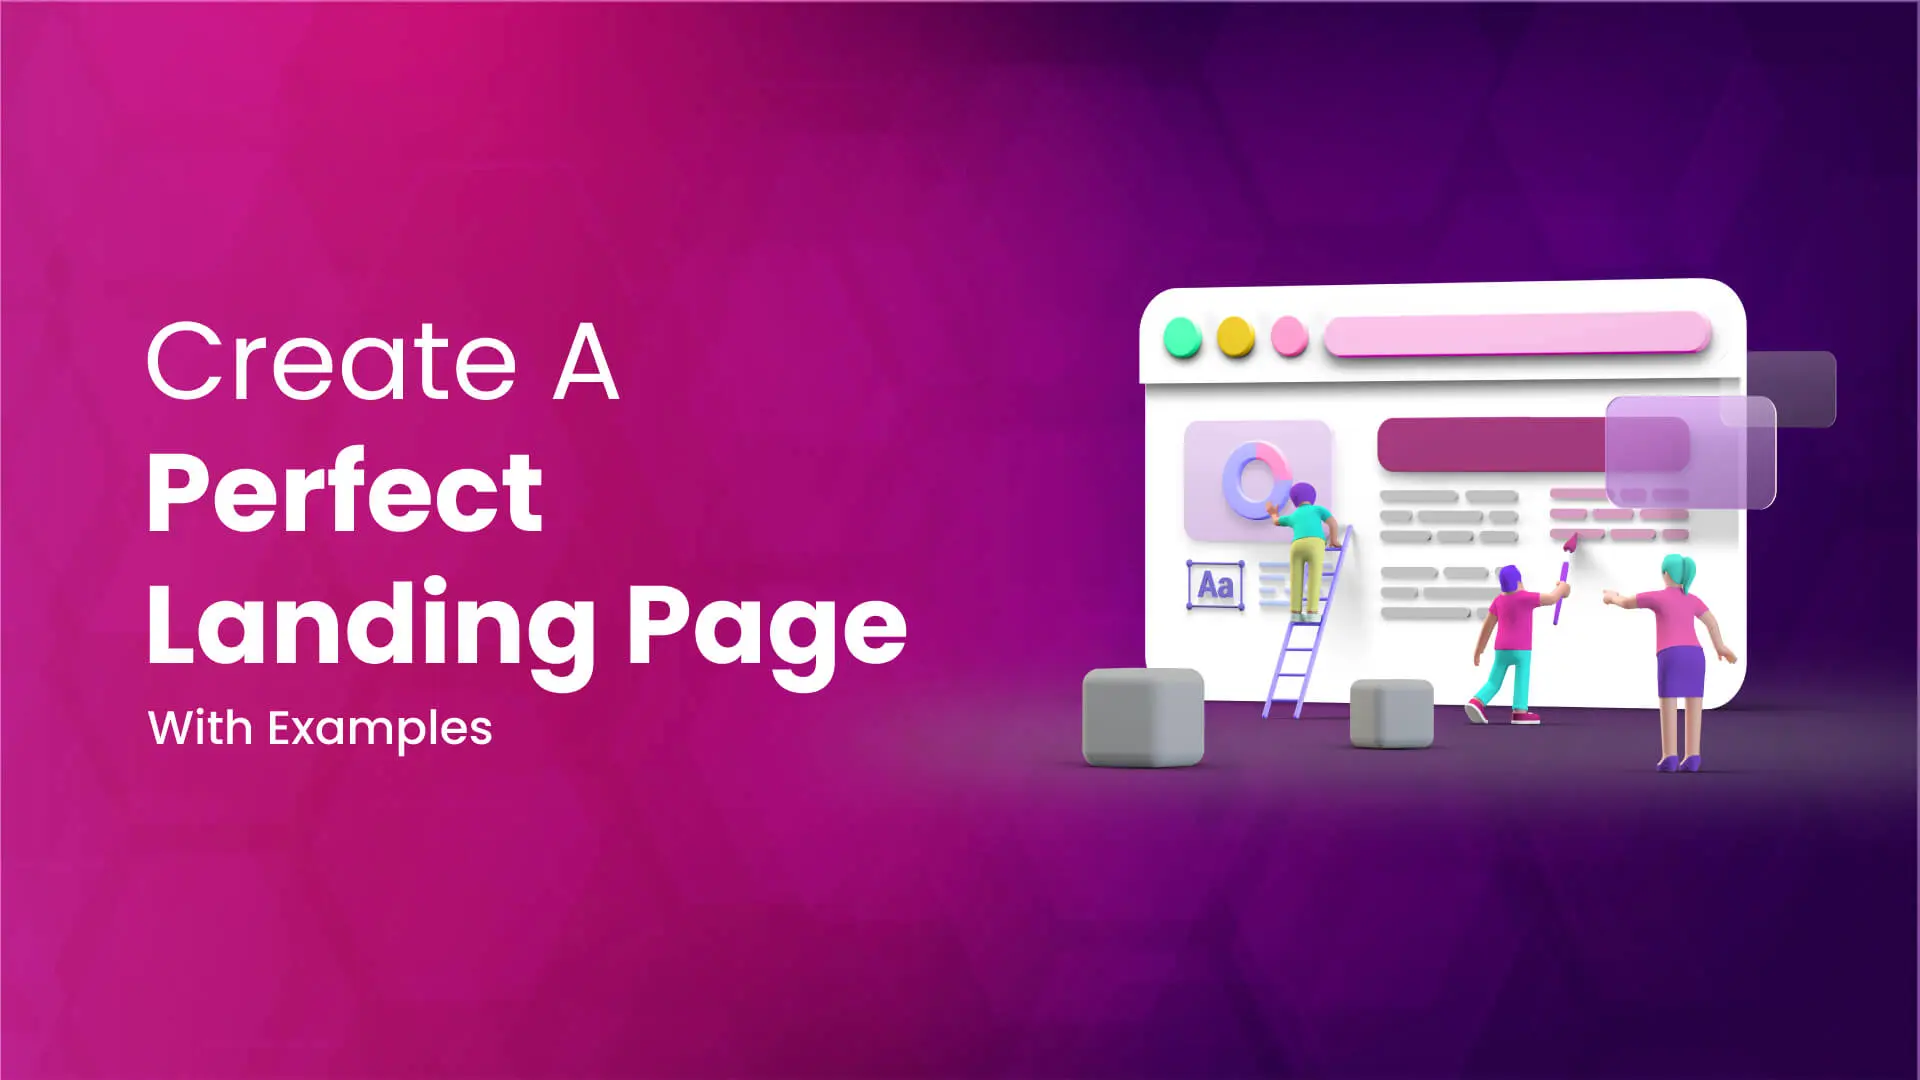 How to create a perfect landing page